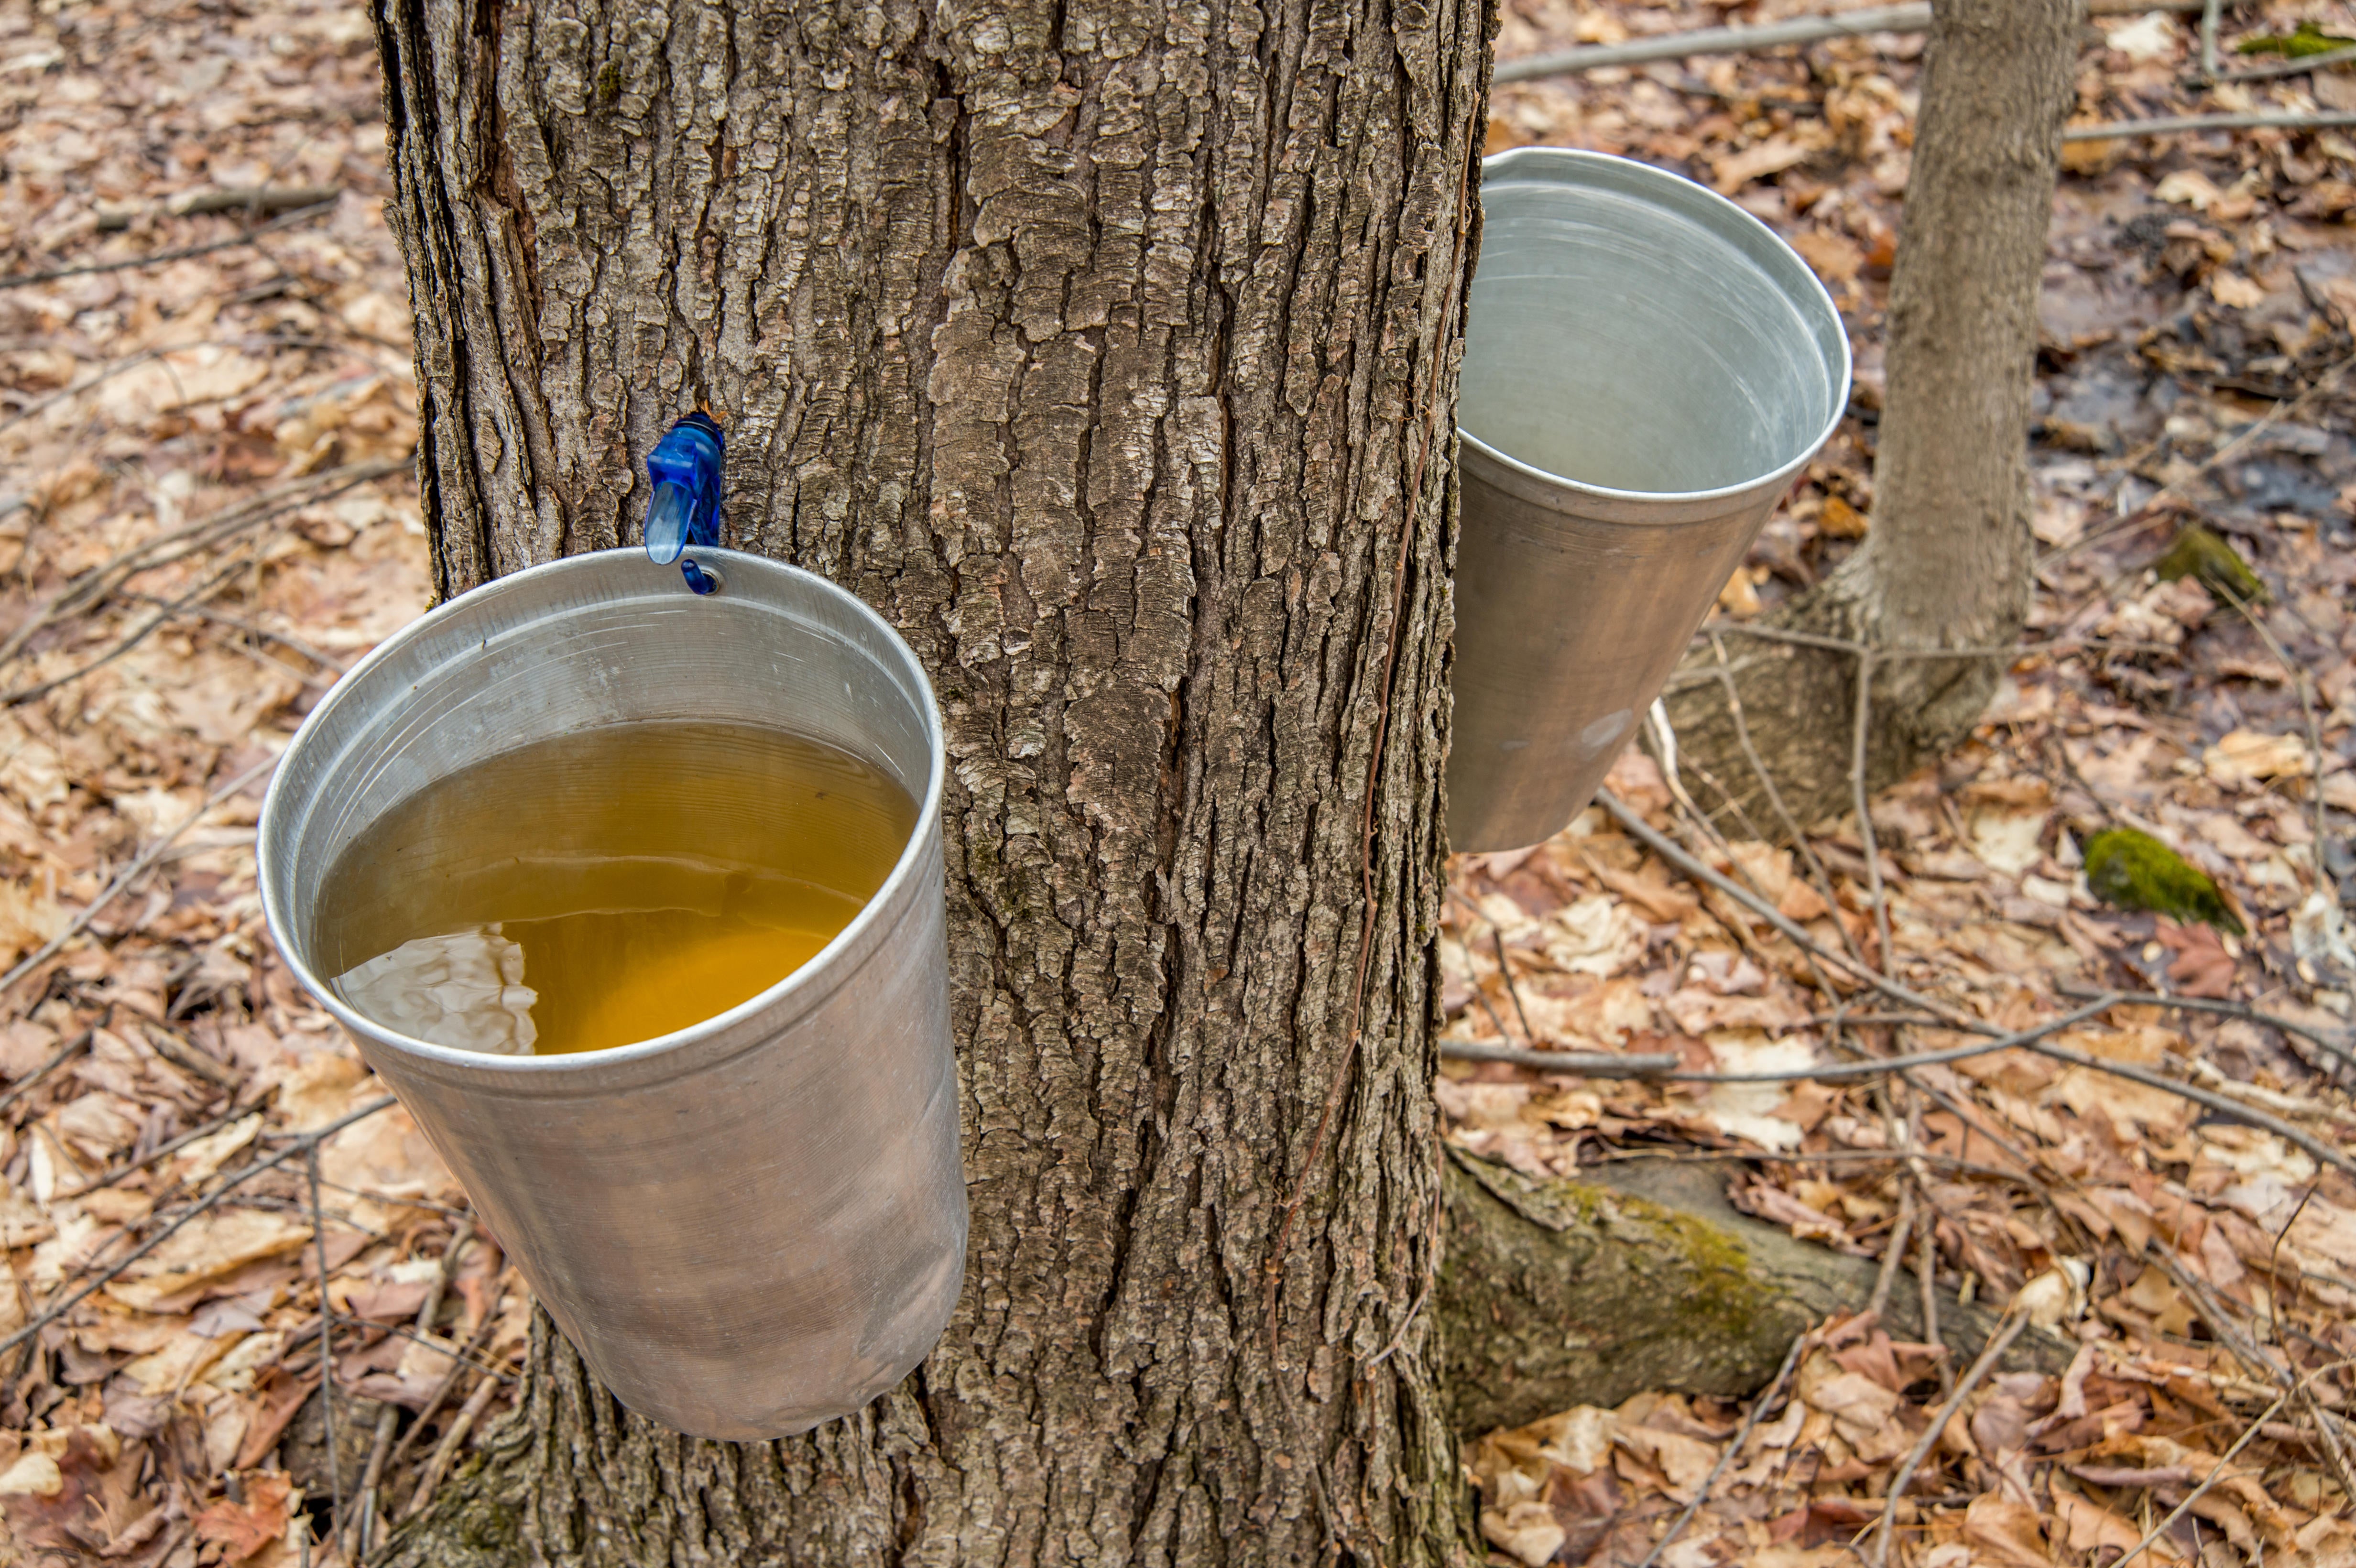 Maple syrup relies on freezing and thawing cycles in winter